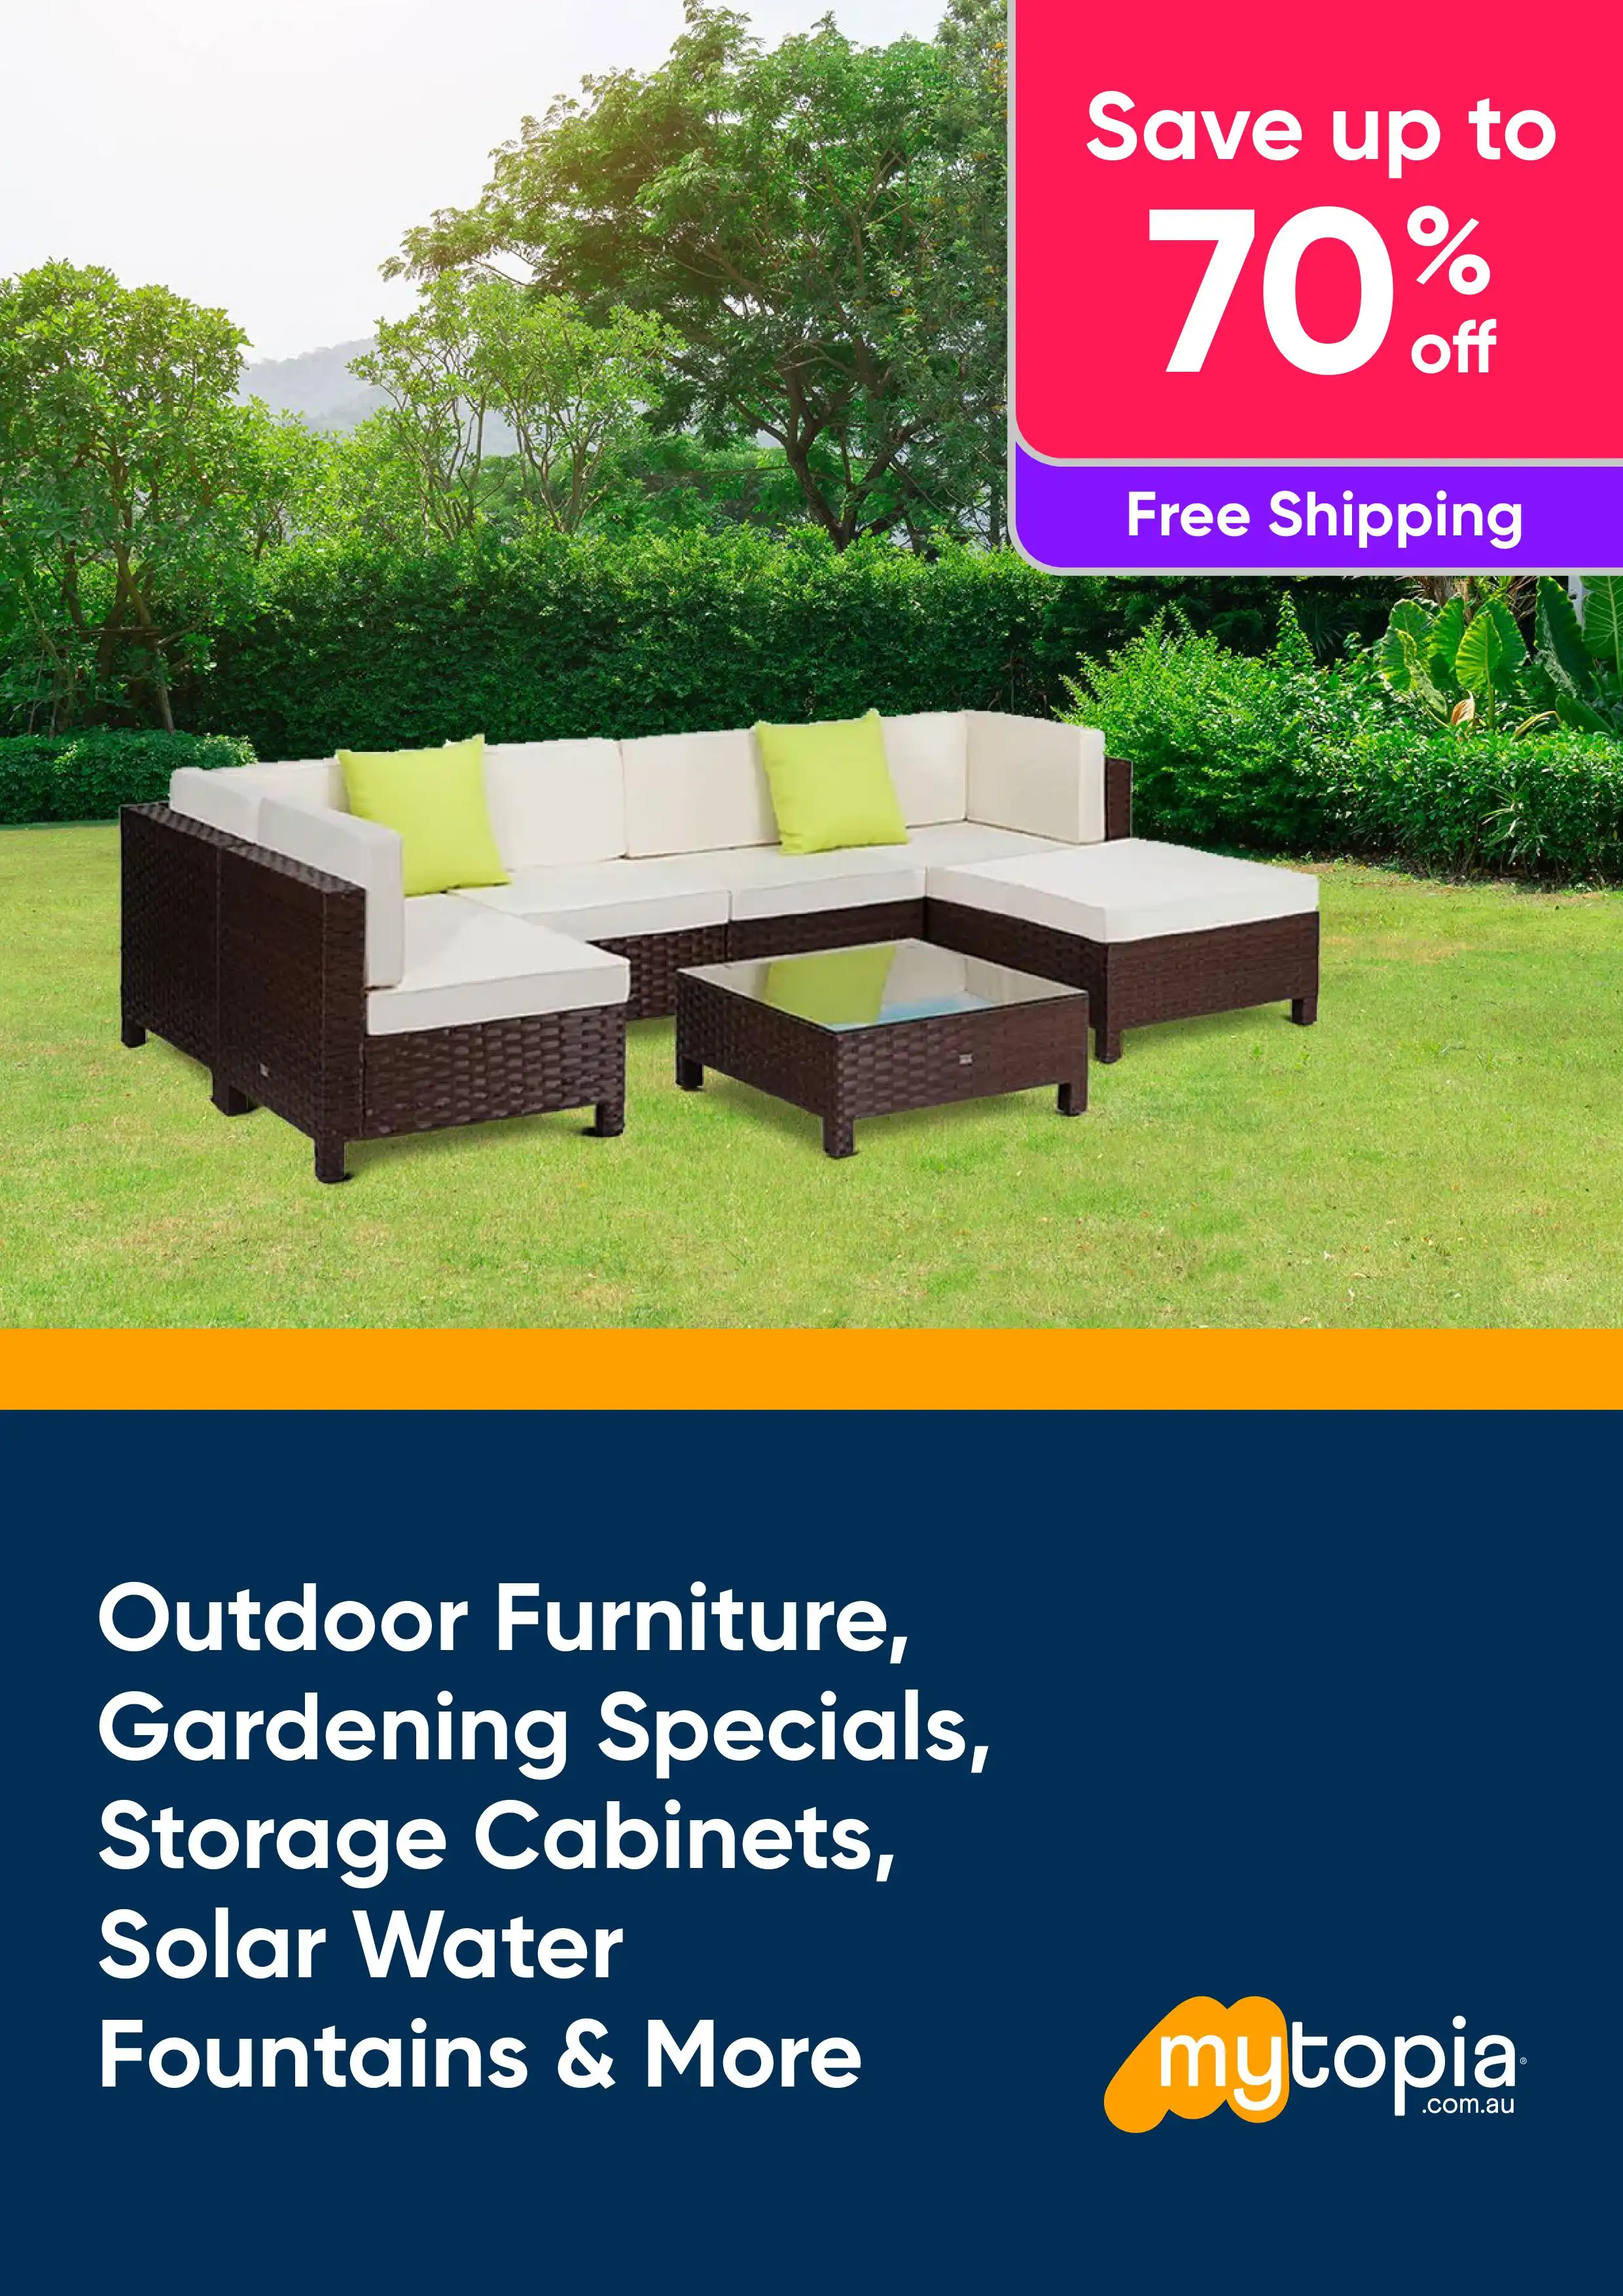 Outdoor Furniture, Gardening Specials, Storage Cabinets, Solar Water Fountains and More - Save Up To 70% Off